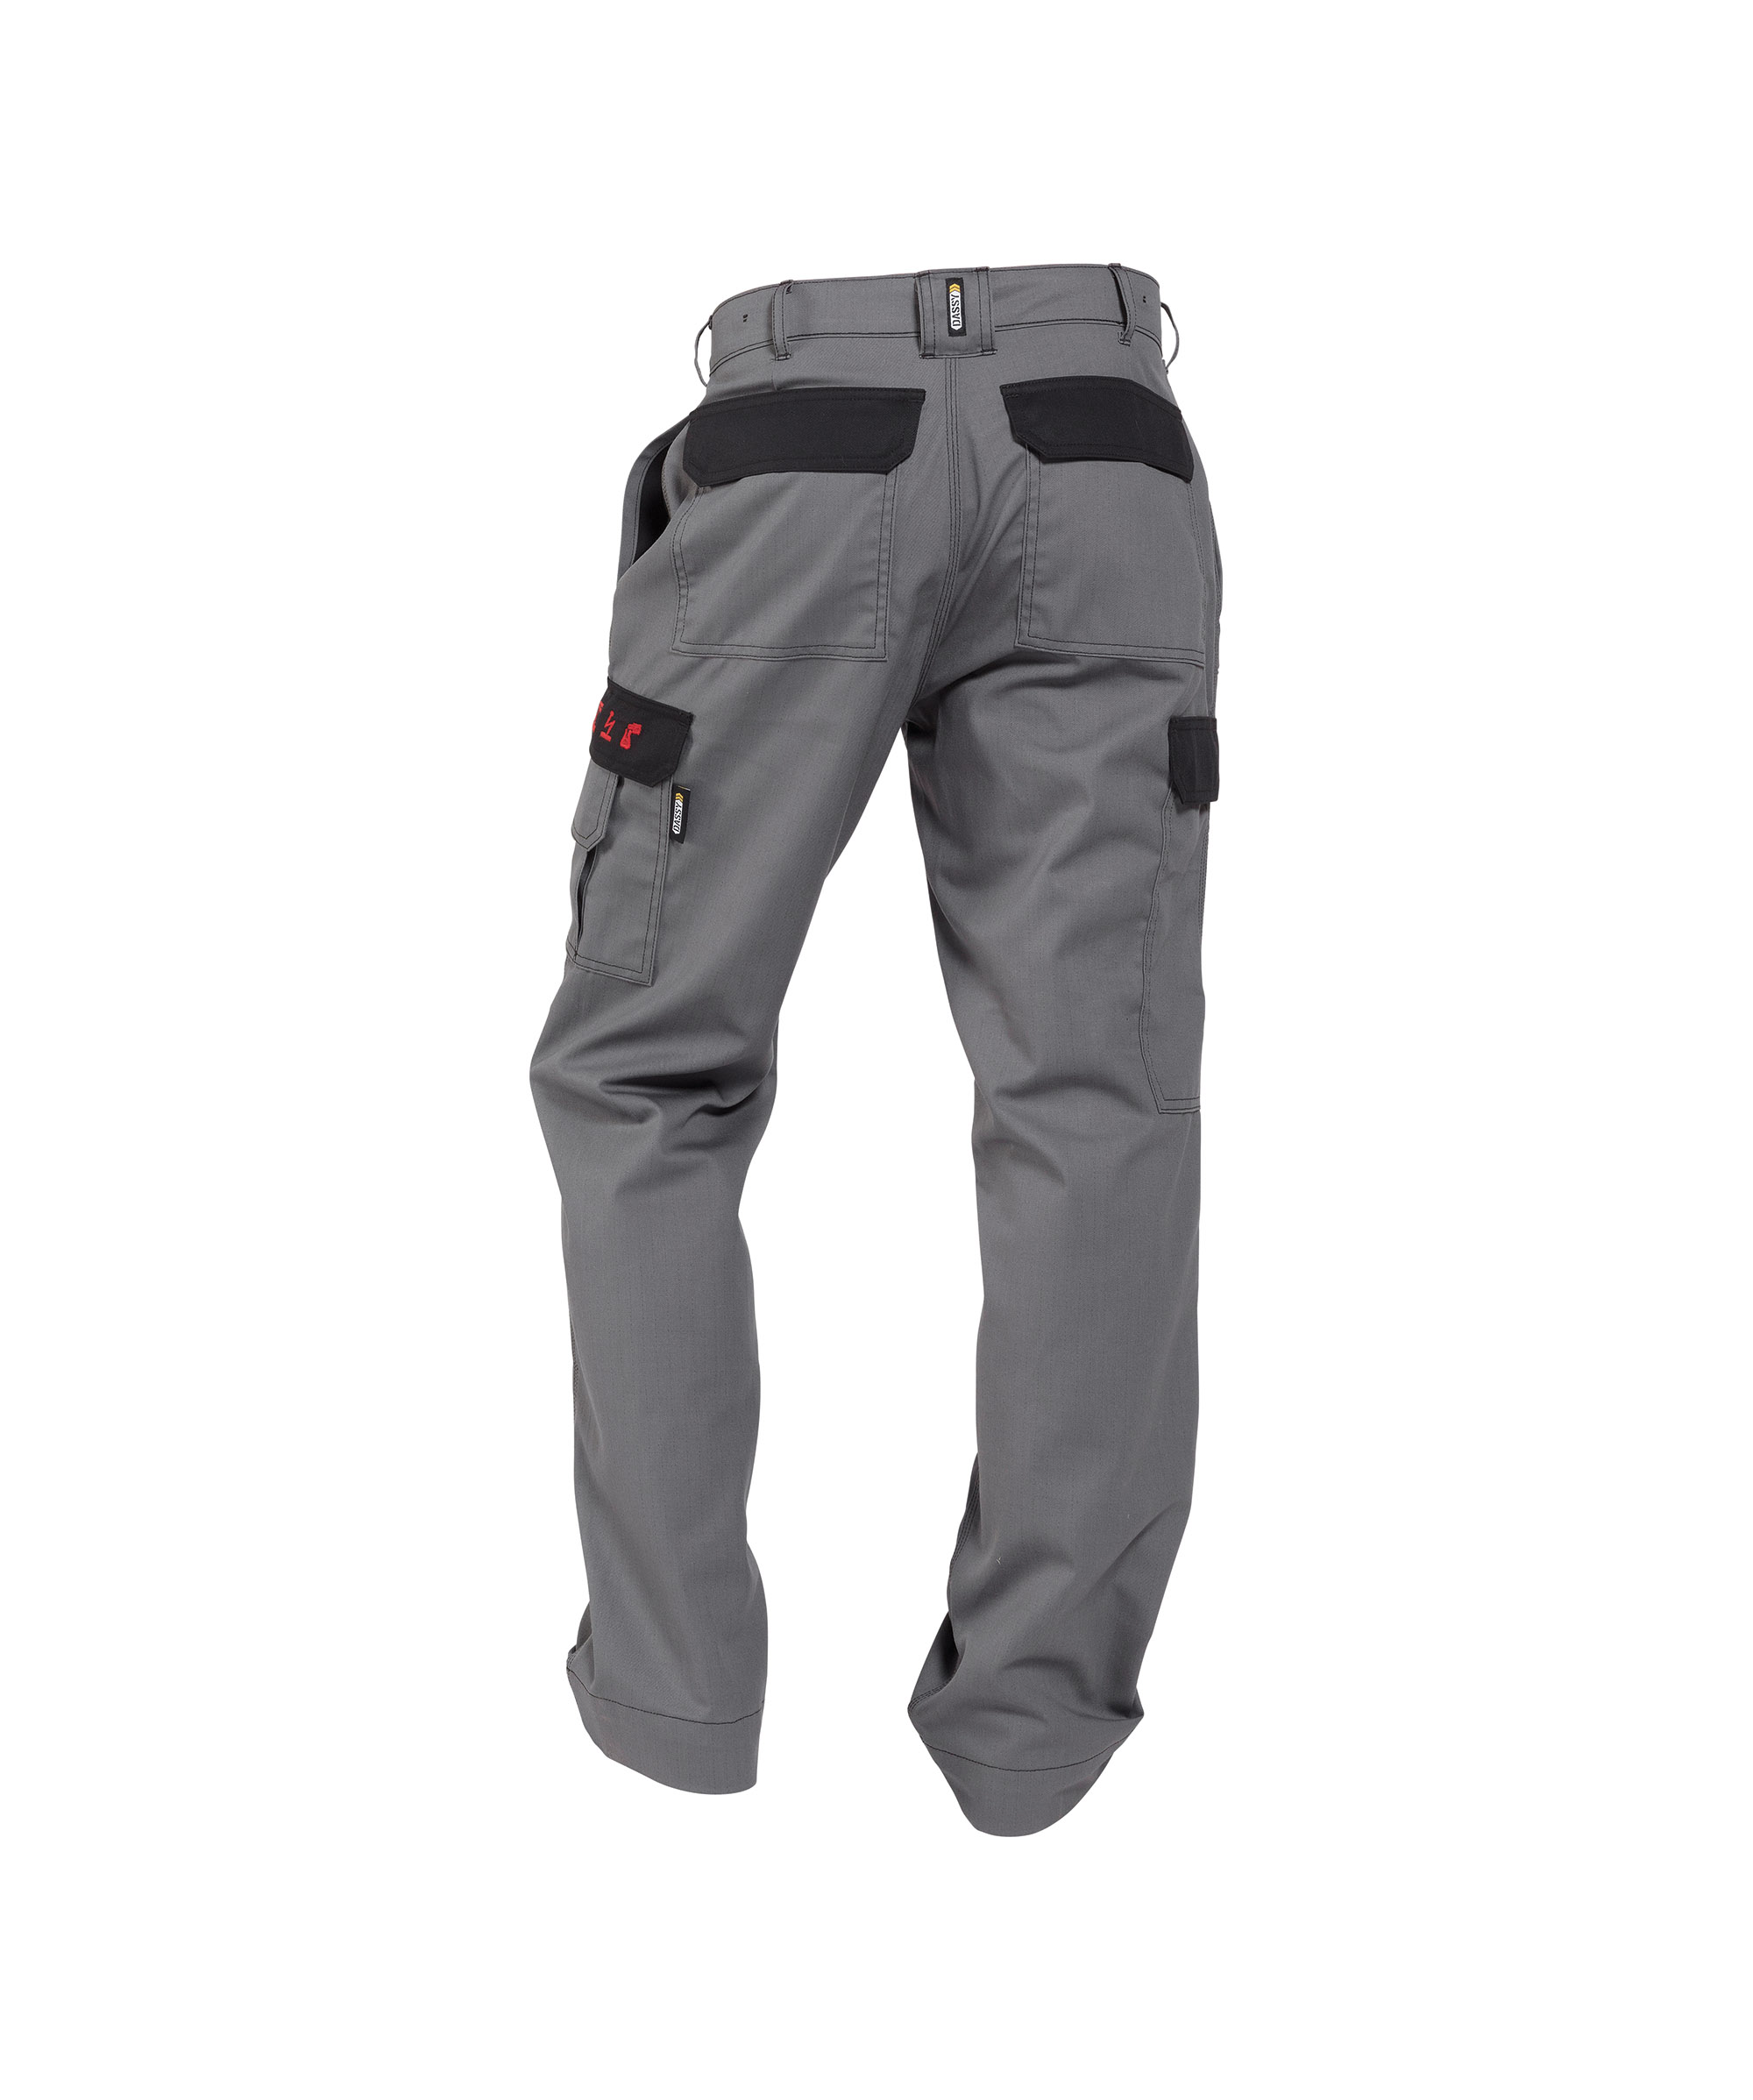 lincoln_two-tone-multinorm-work-trousers-with-knee-pockets_graphite-grey-black_back.jpg